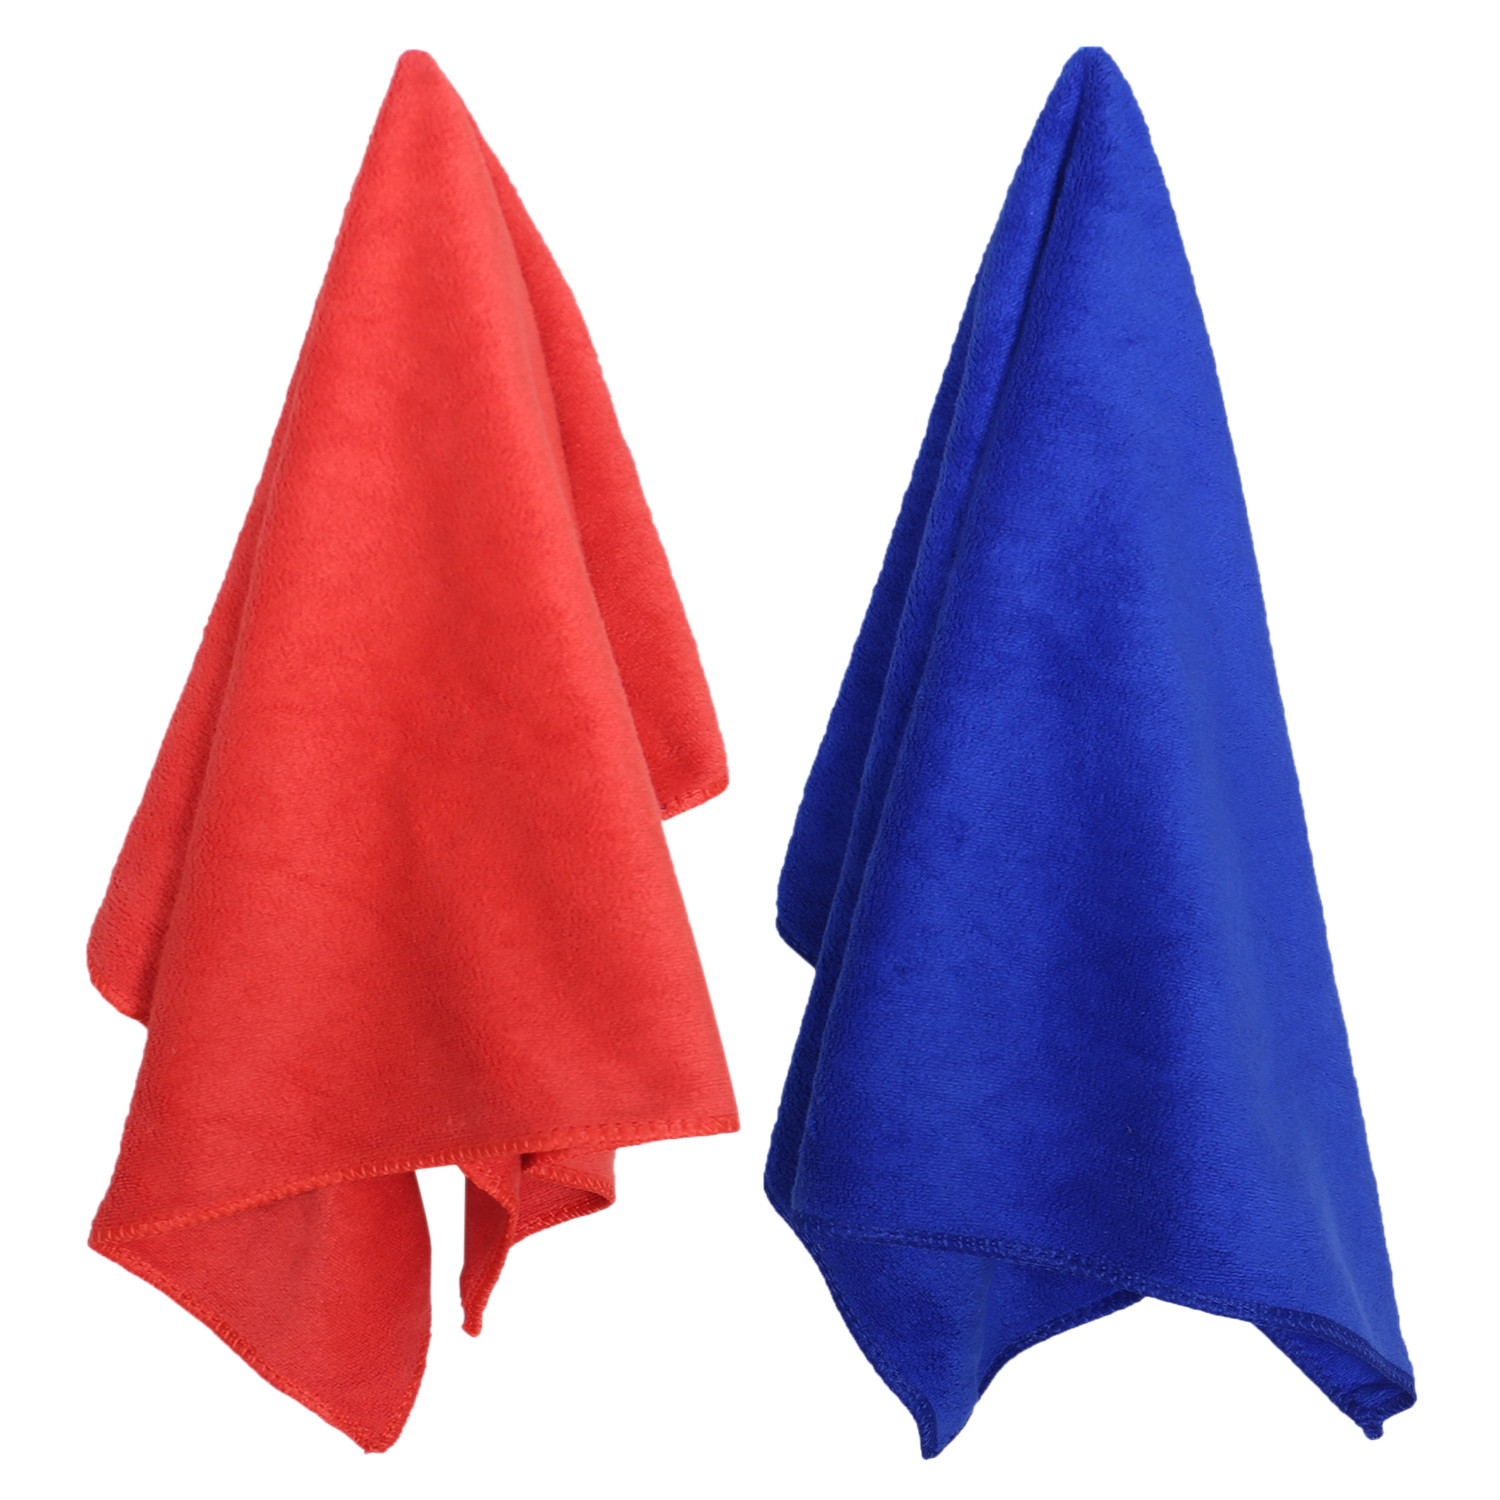 Kuber Industries Cleaning Cloths|Microfiber Highly Absorbent Wash Towels for Kitchen,Car,Window,24 x 16 Inch,Pack of 2 (Red & Blue)